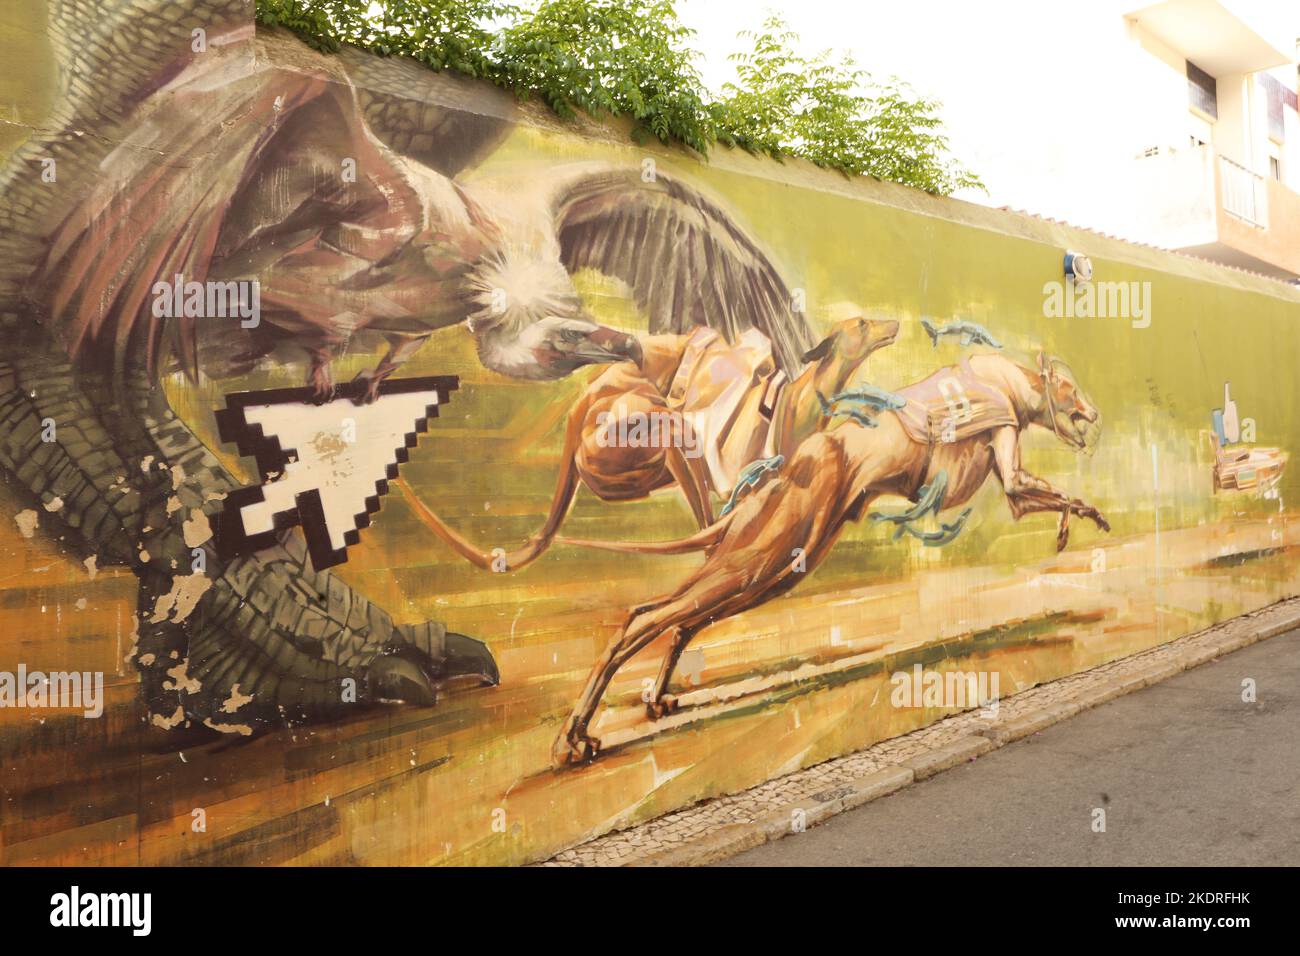 A mural of two greyhounds and an eagle chasing a power boat on a wall in old town, Lagos, Algarve, Portugal Stock Photo